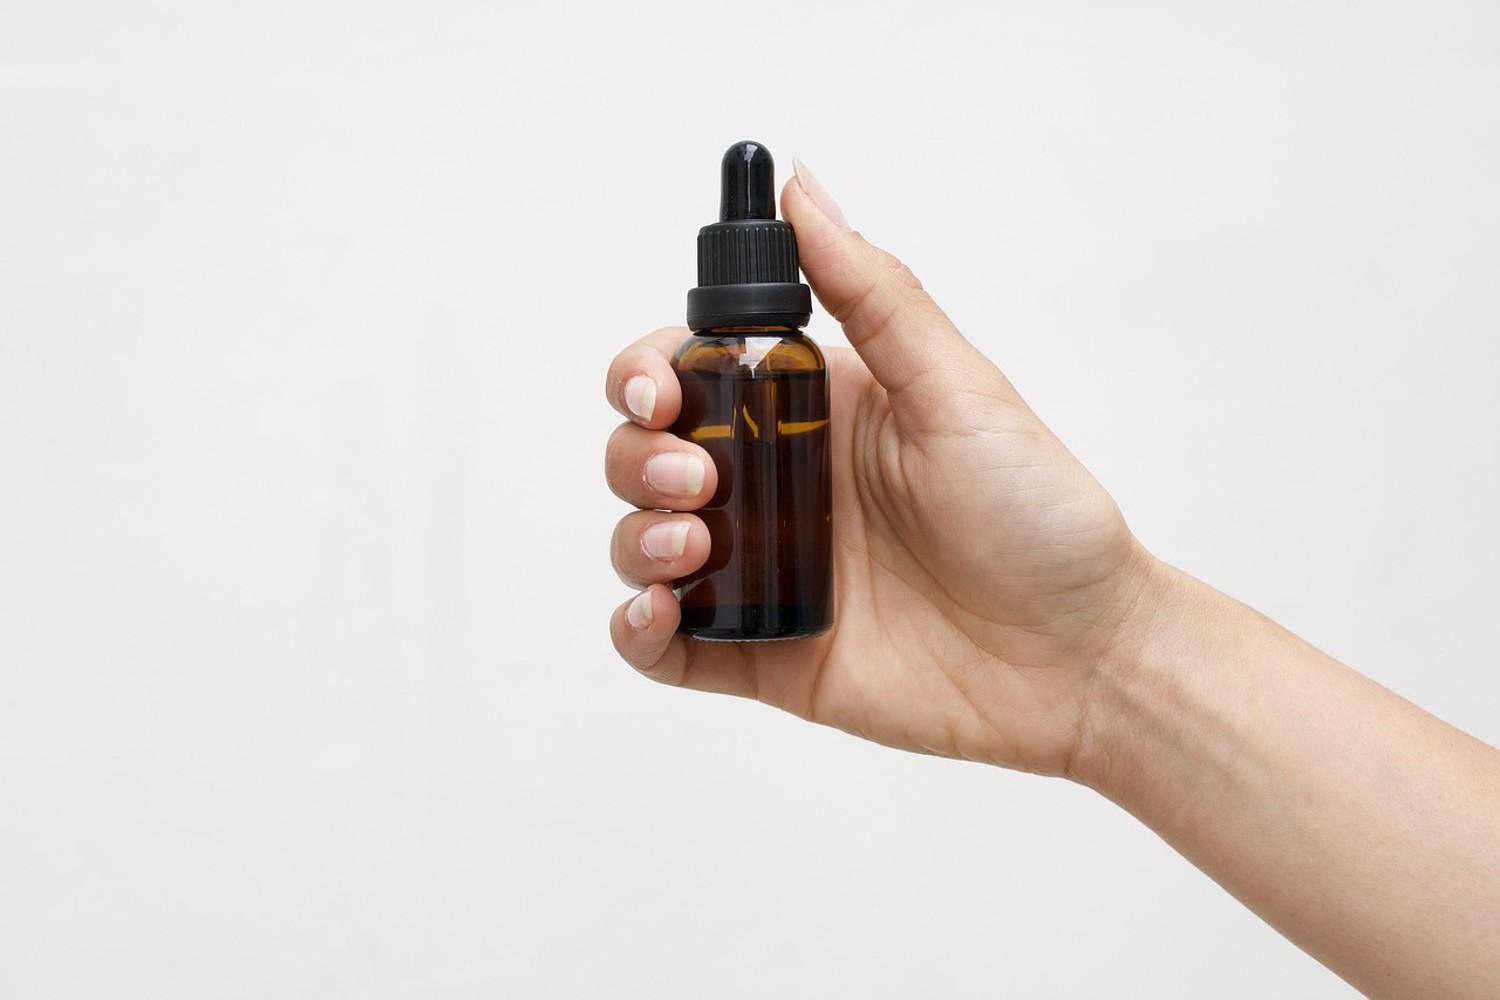 Hand holding cannabis tincture bottle against a white background